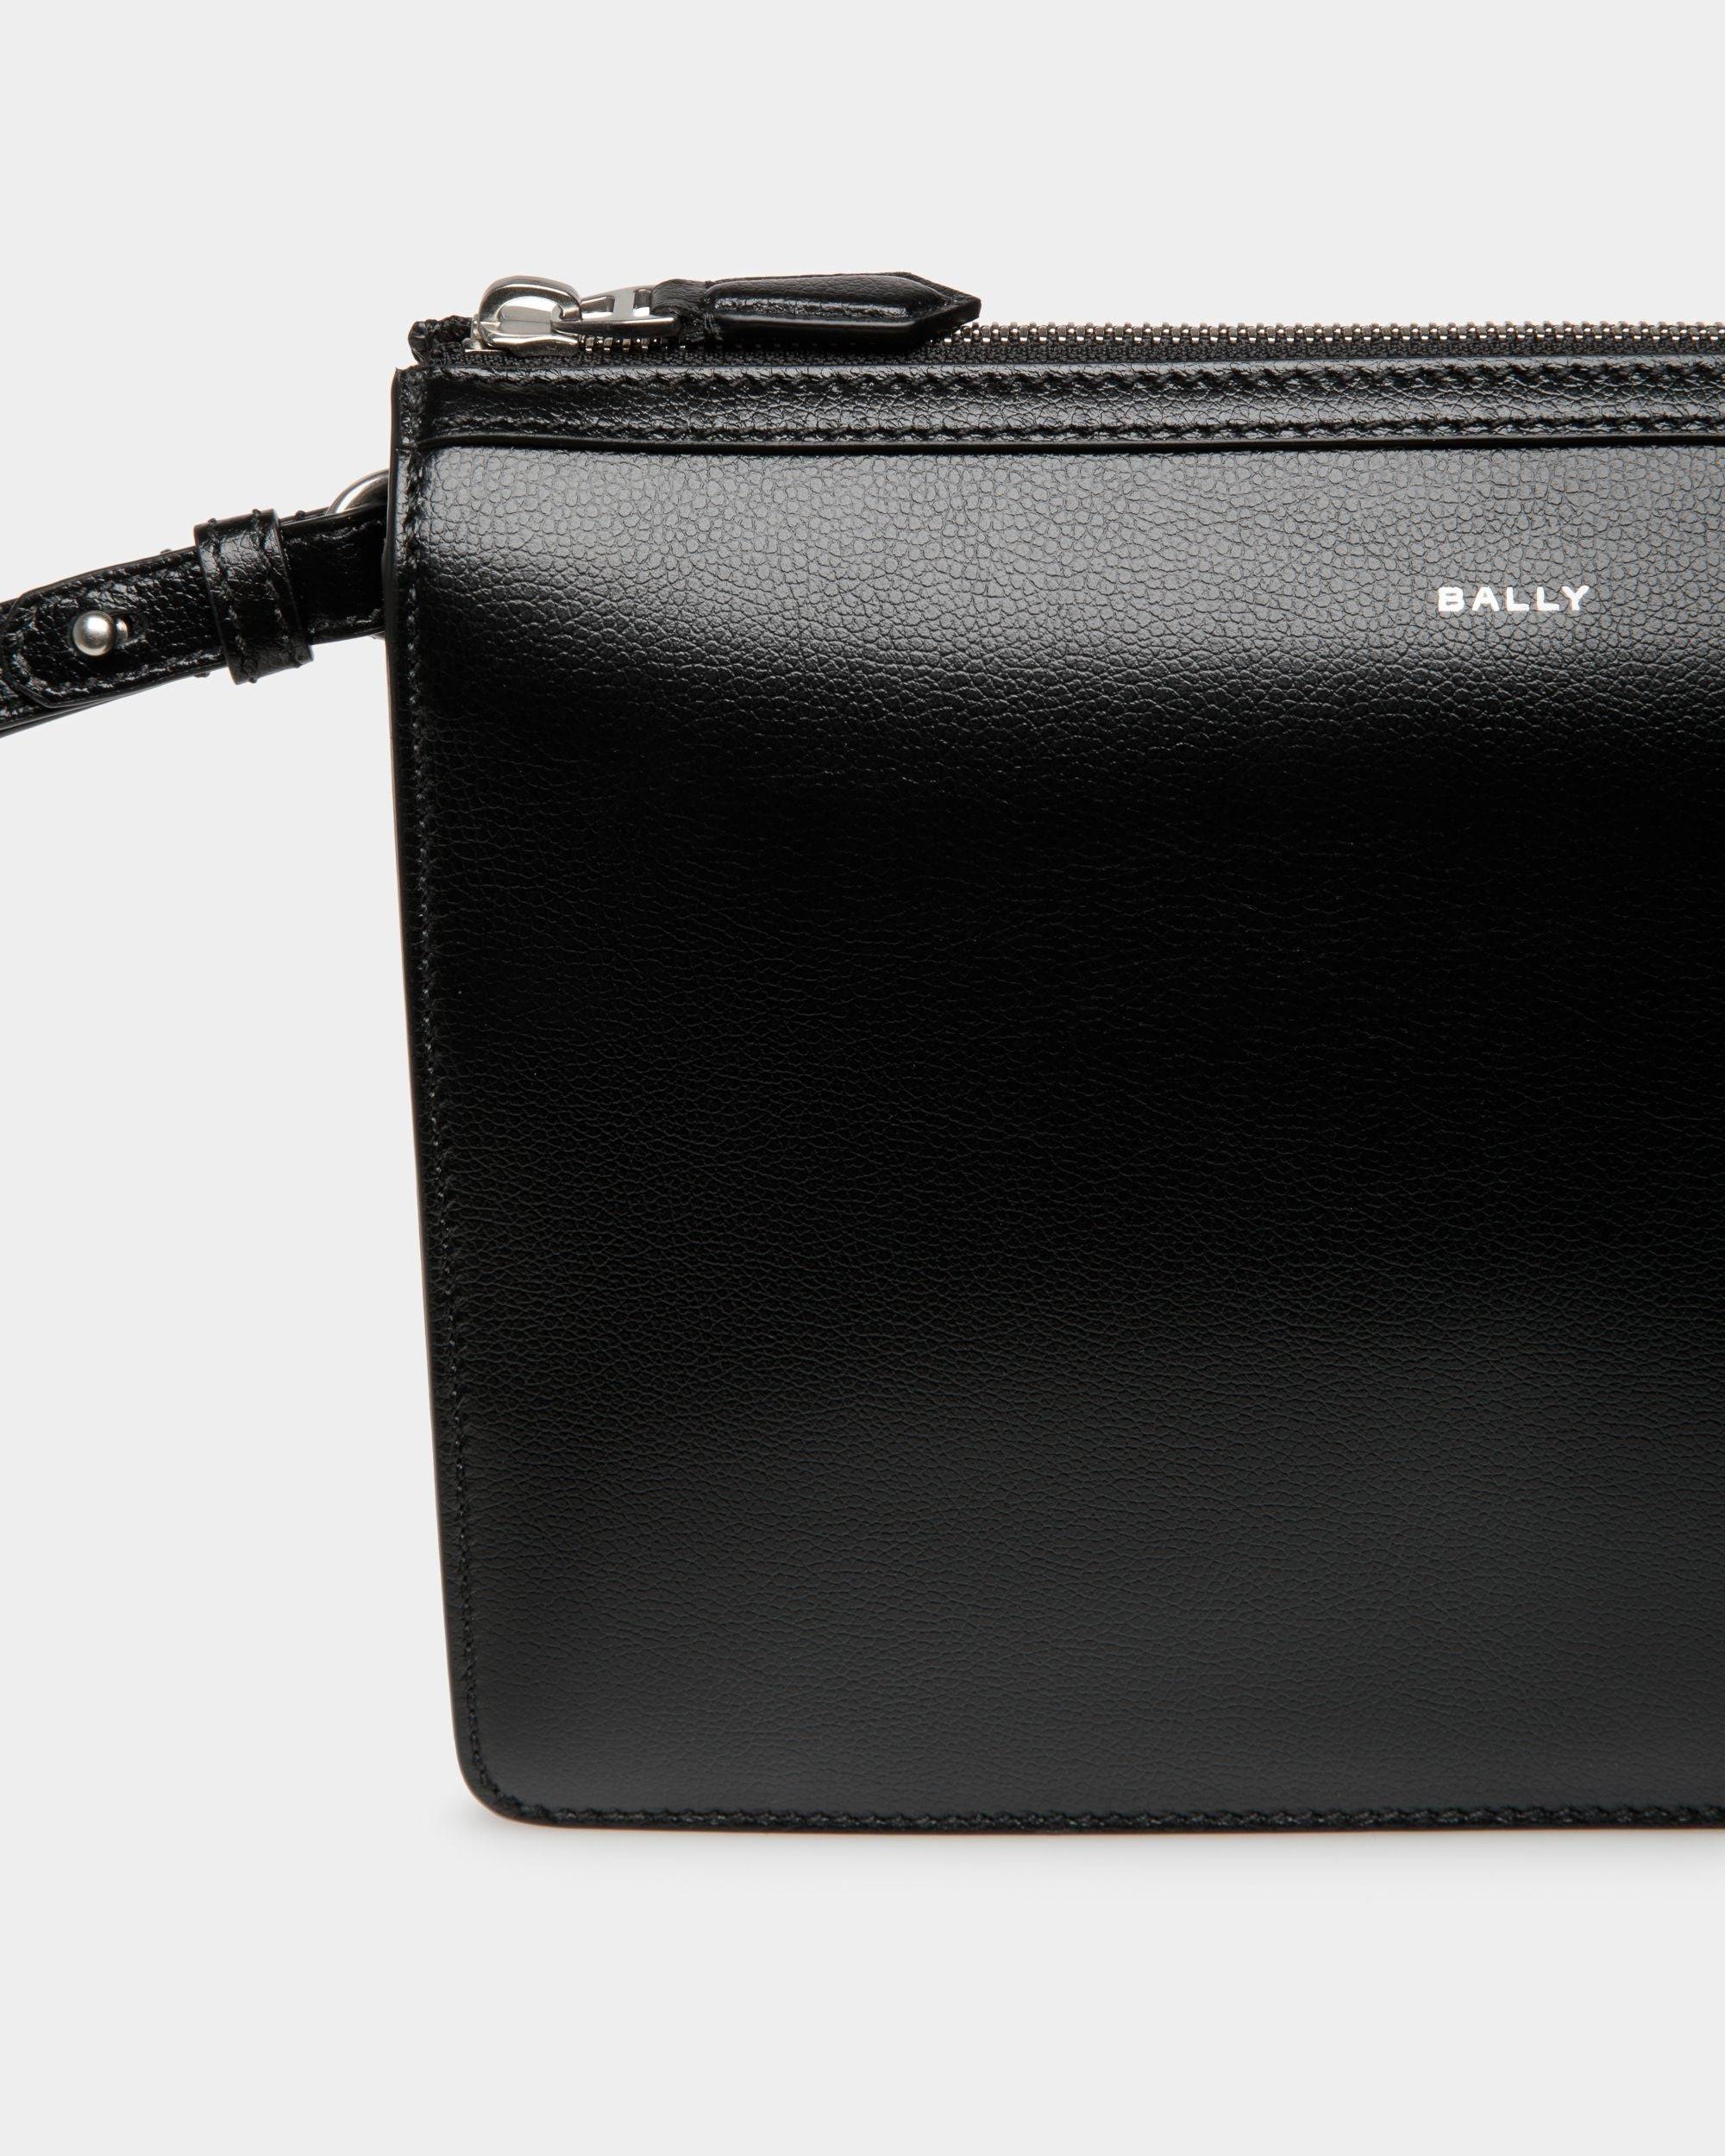 PM | Men's Clutches And Portfolios | Black Leather | Bally | Still Life Detail